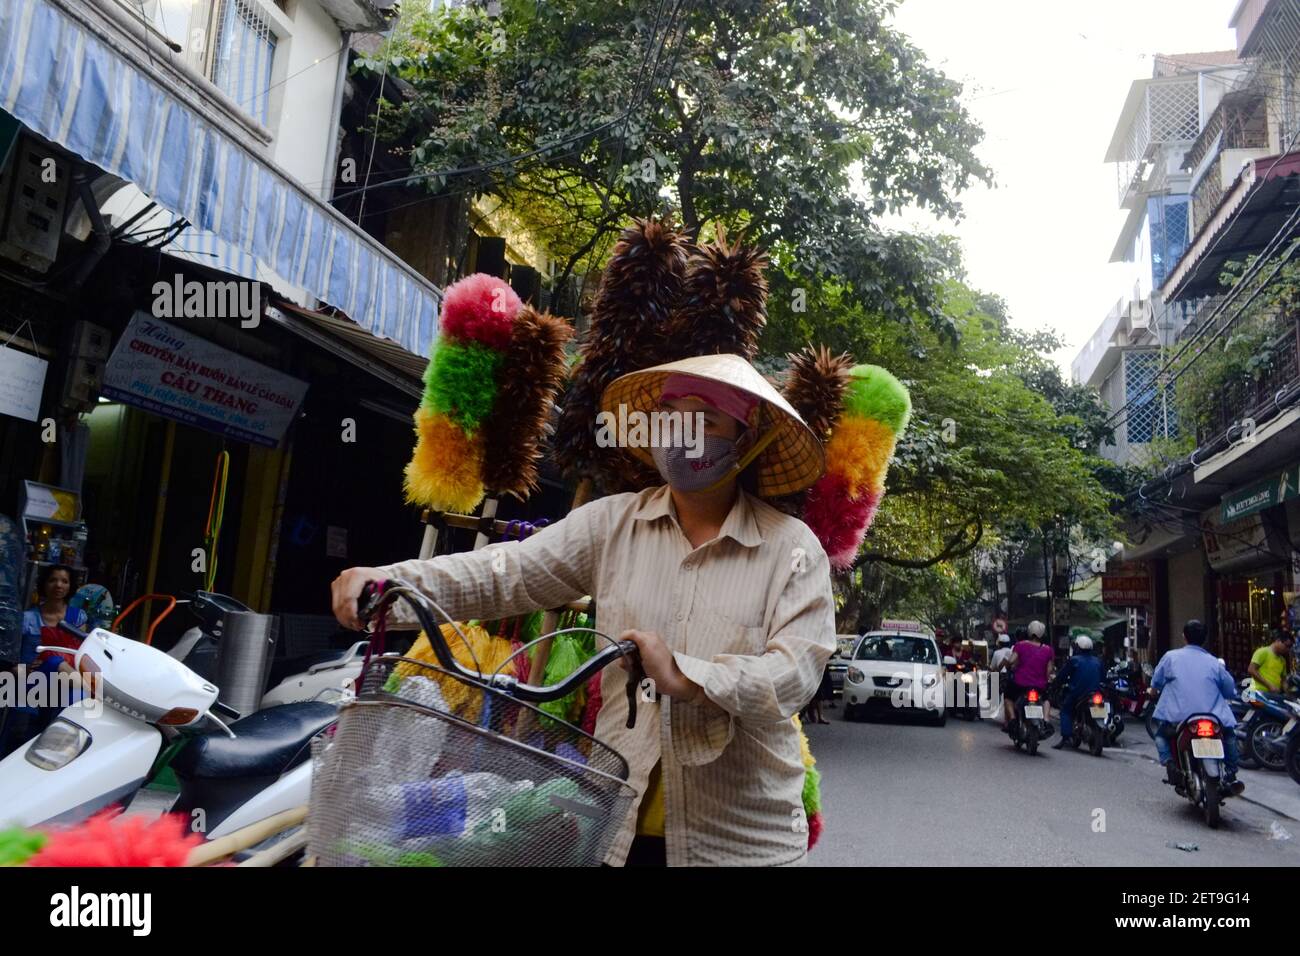 Hanoi, Vietnam - September, 2015: Vietnamese woman in mask walking with bike and selling colorful feather dusters on the city street Stock Photo